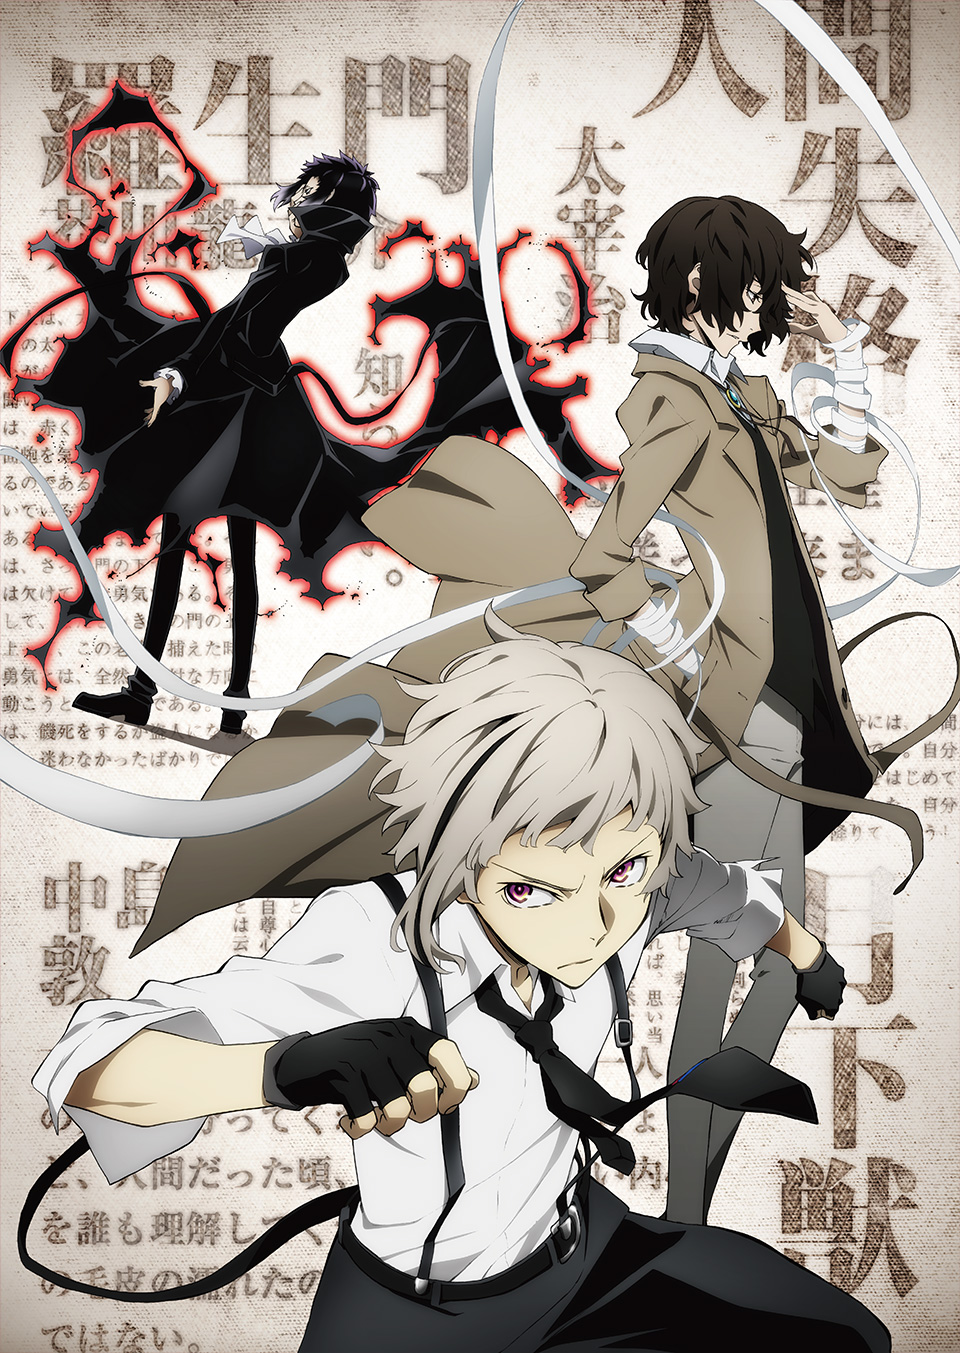 Nice Images Collection: Bungou Stray Dogs Desktop Wallpapers